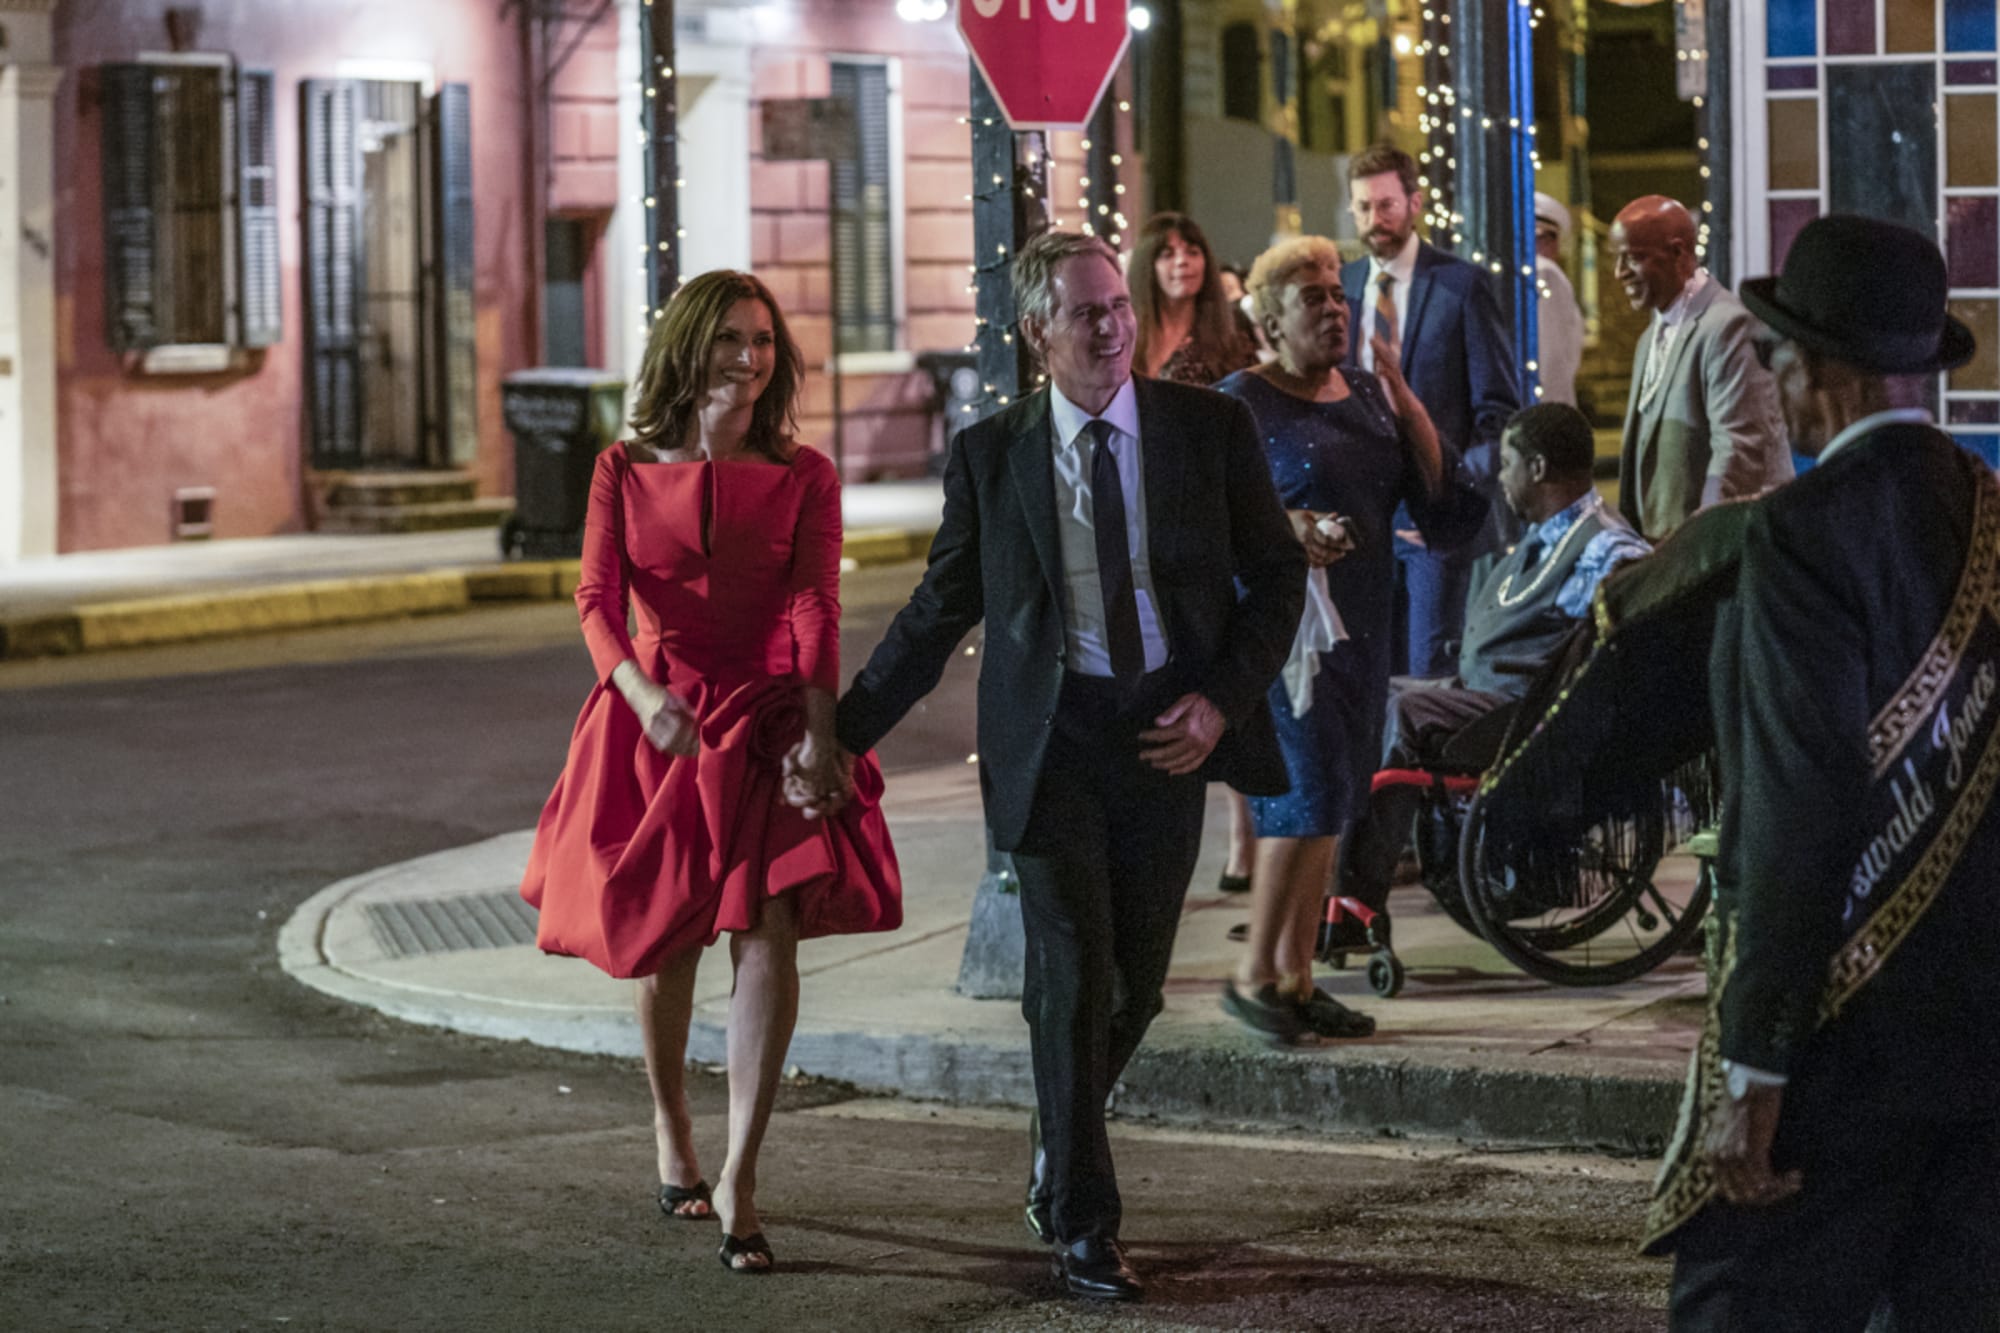 Watch the NCIS New Orleans series finale live online